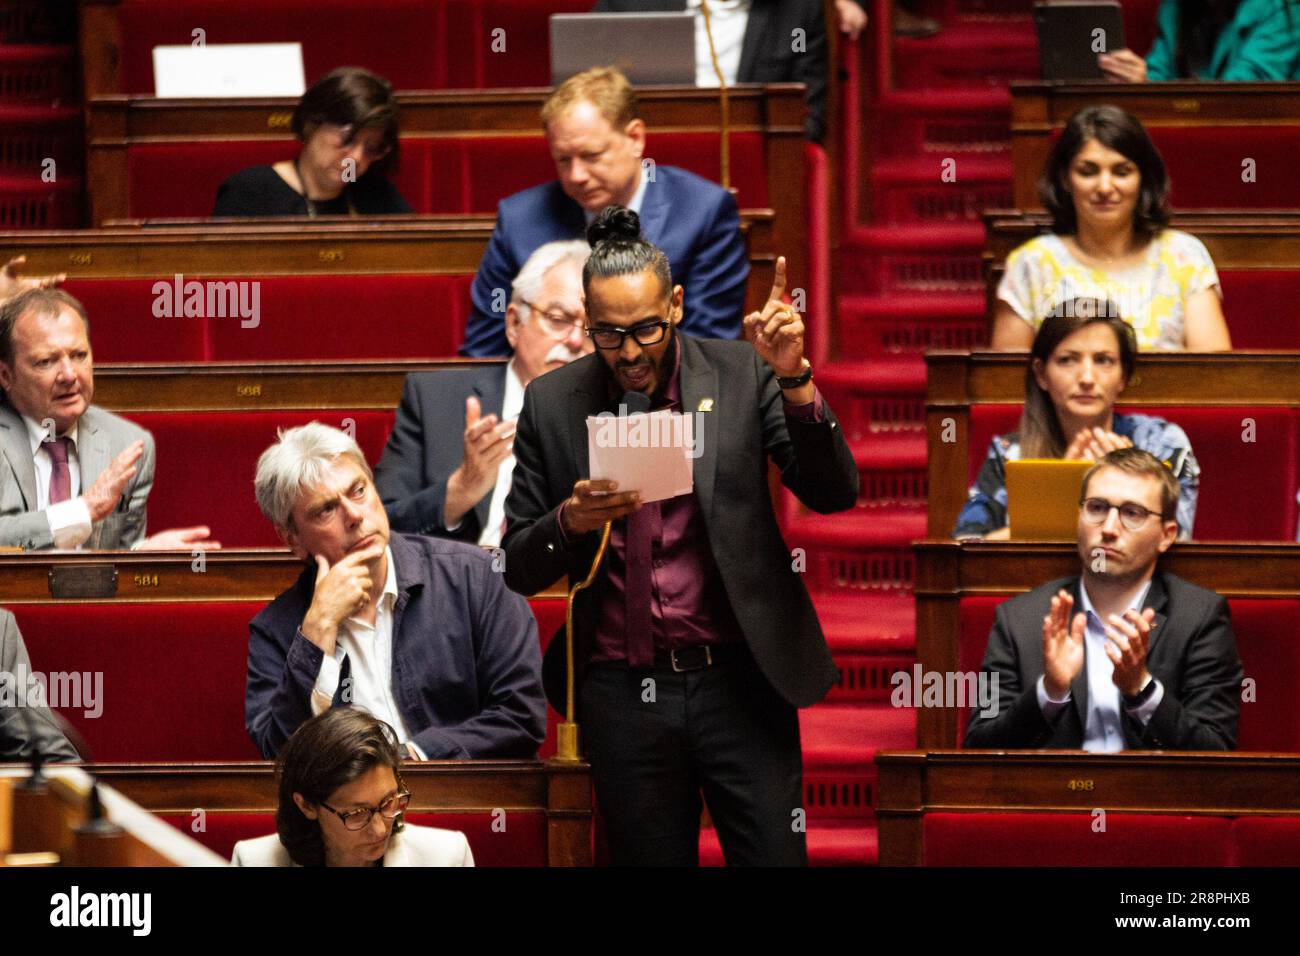 Frédéric Maillot (NUPES) speaks in the National Assembly during the session of questions to the government. Questions session for the government of Elisabeth Borne in the National Assembly, at the Palais Bourbon in Paris. Stock Photo